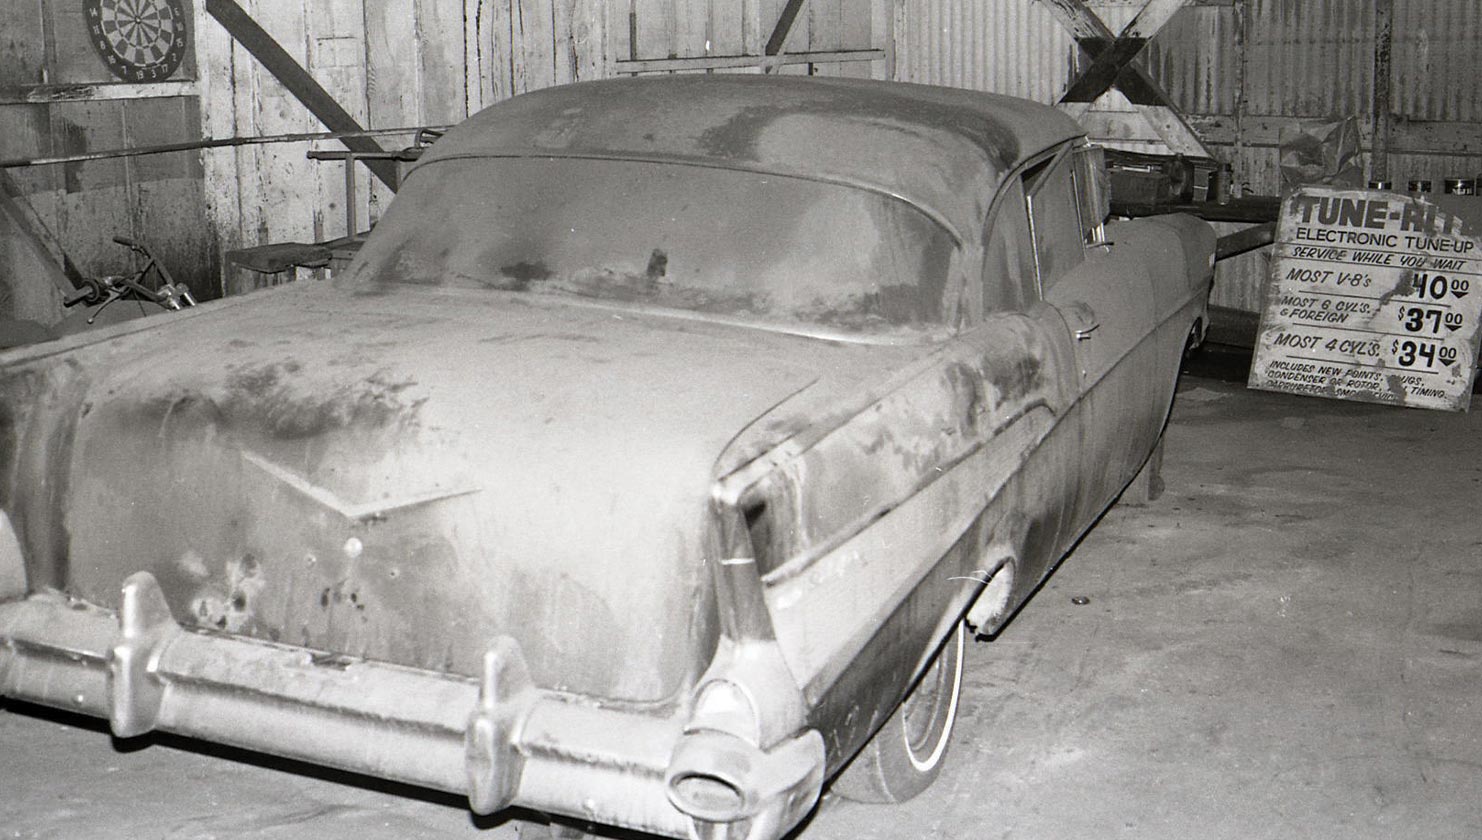 Rear view of an old Chevy in a garage